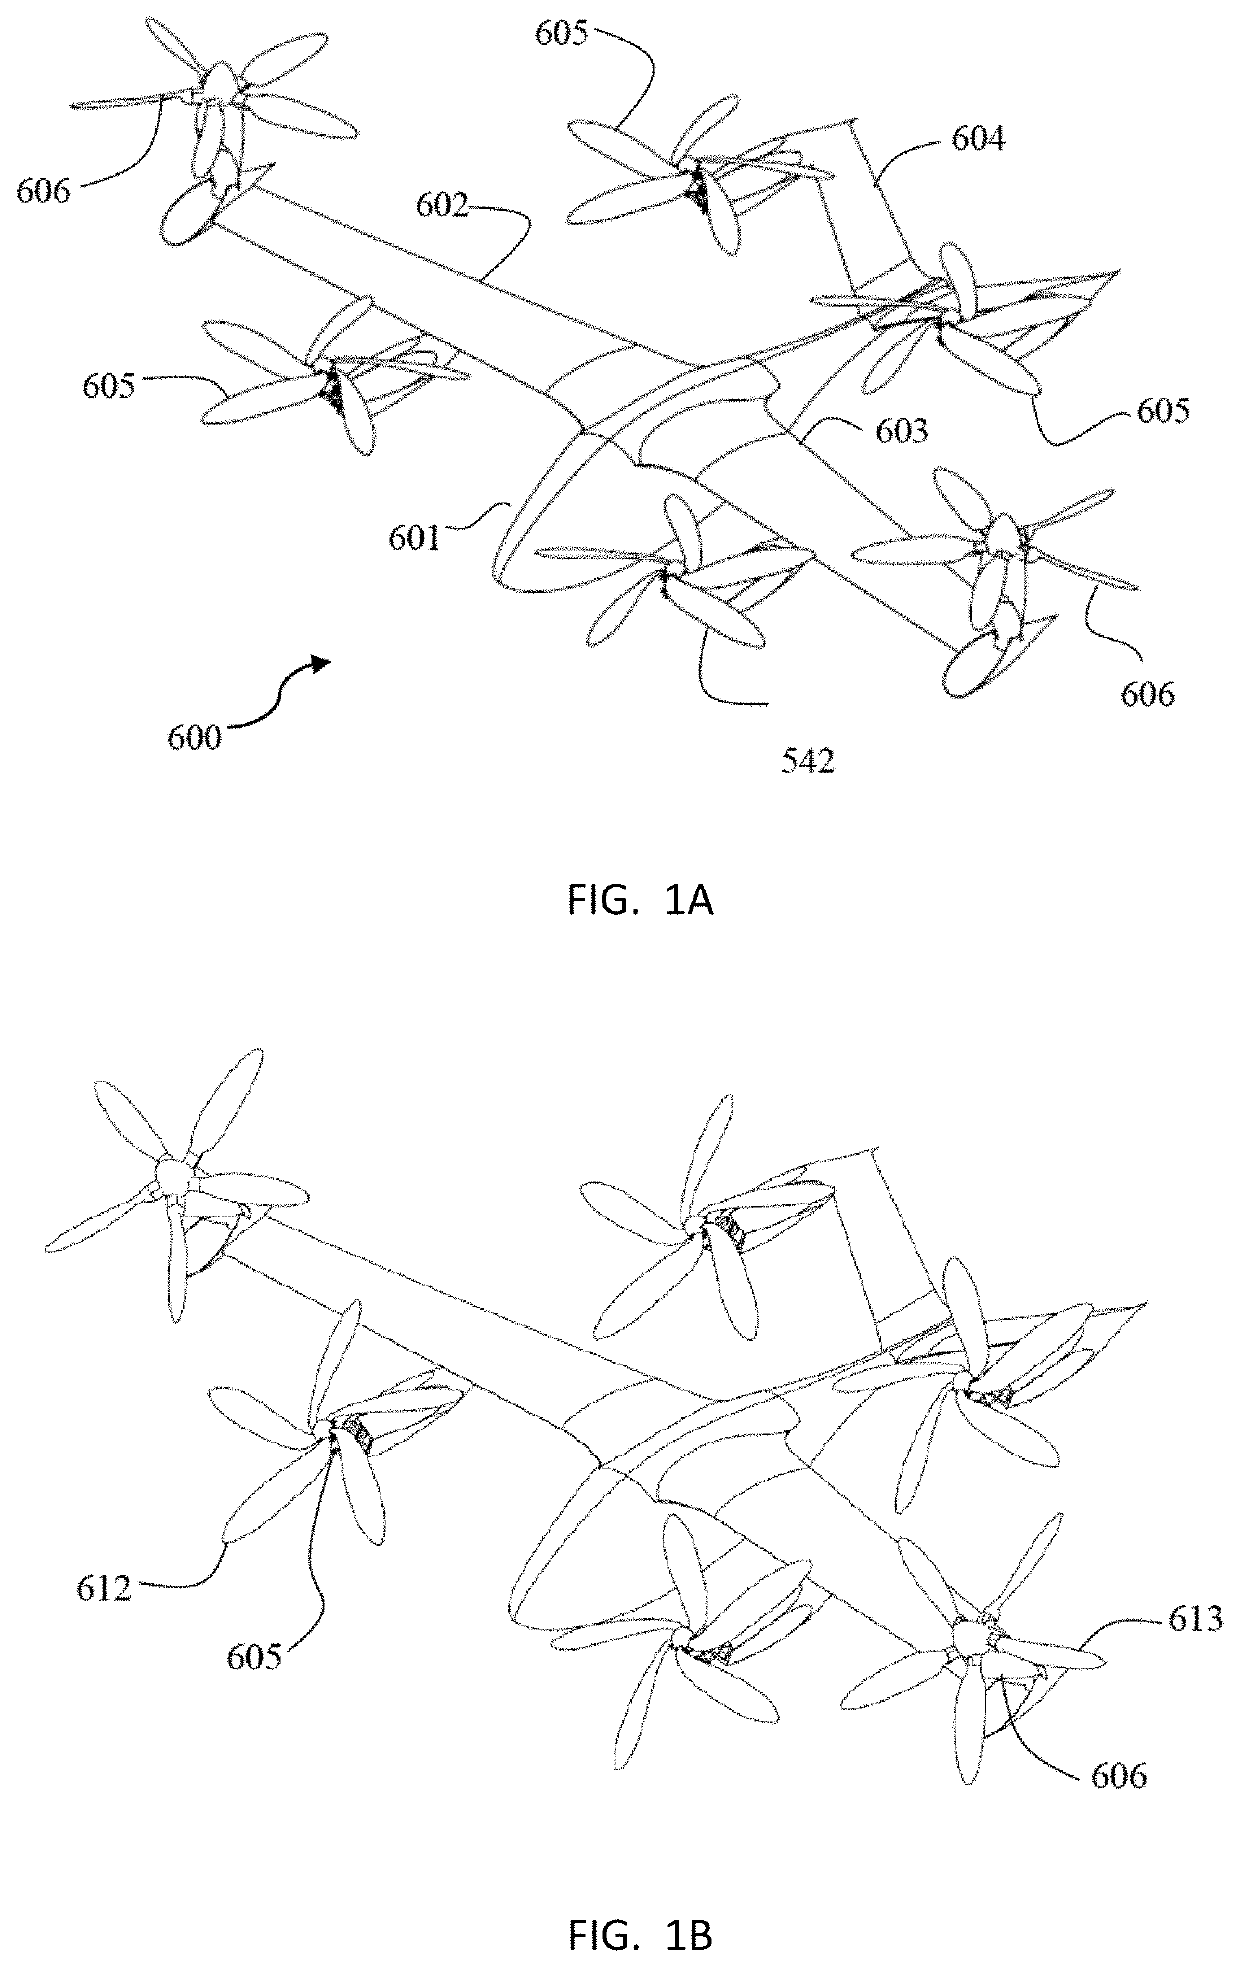 Method And System For Modeling Aerodynamic Interactions In Complex eVTOL Configurations For Realtime Flight Simulations And Hardware Testing